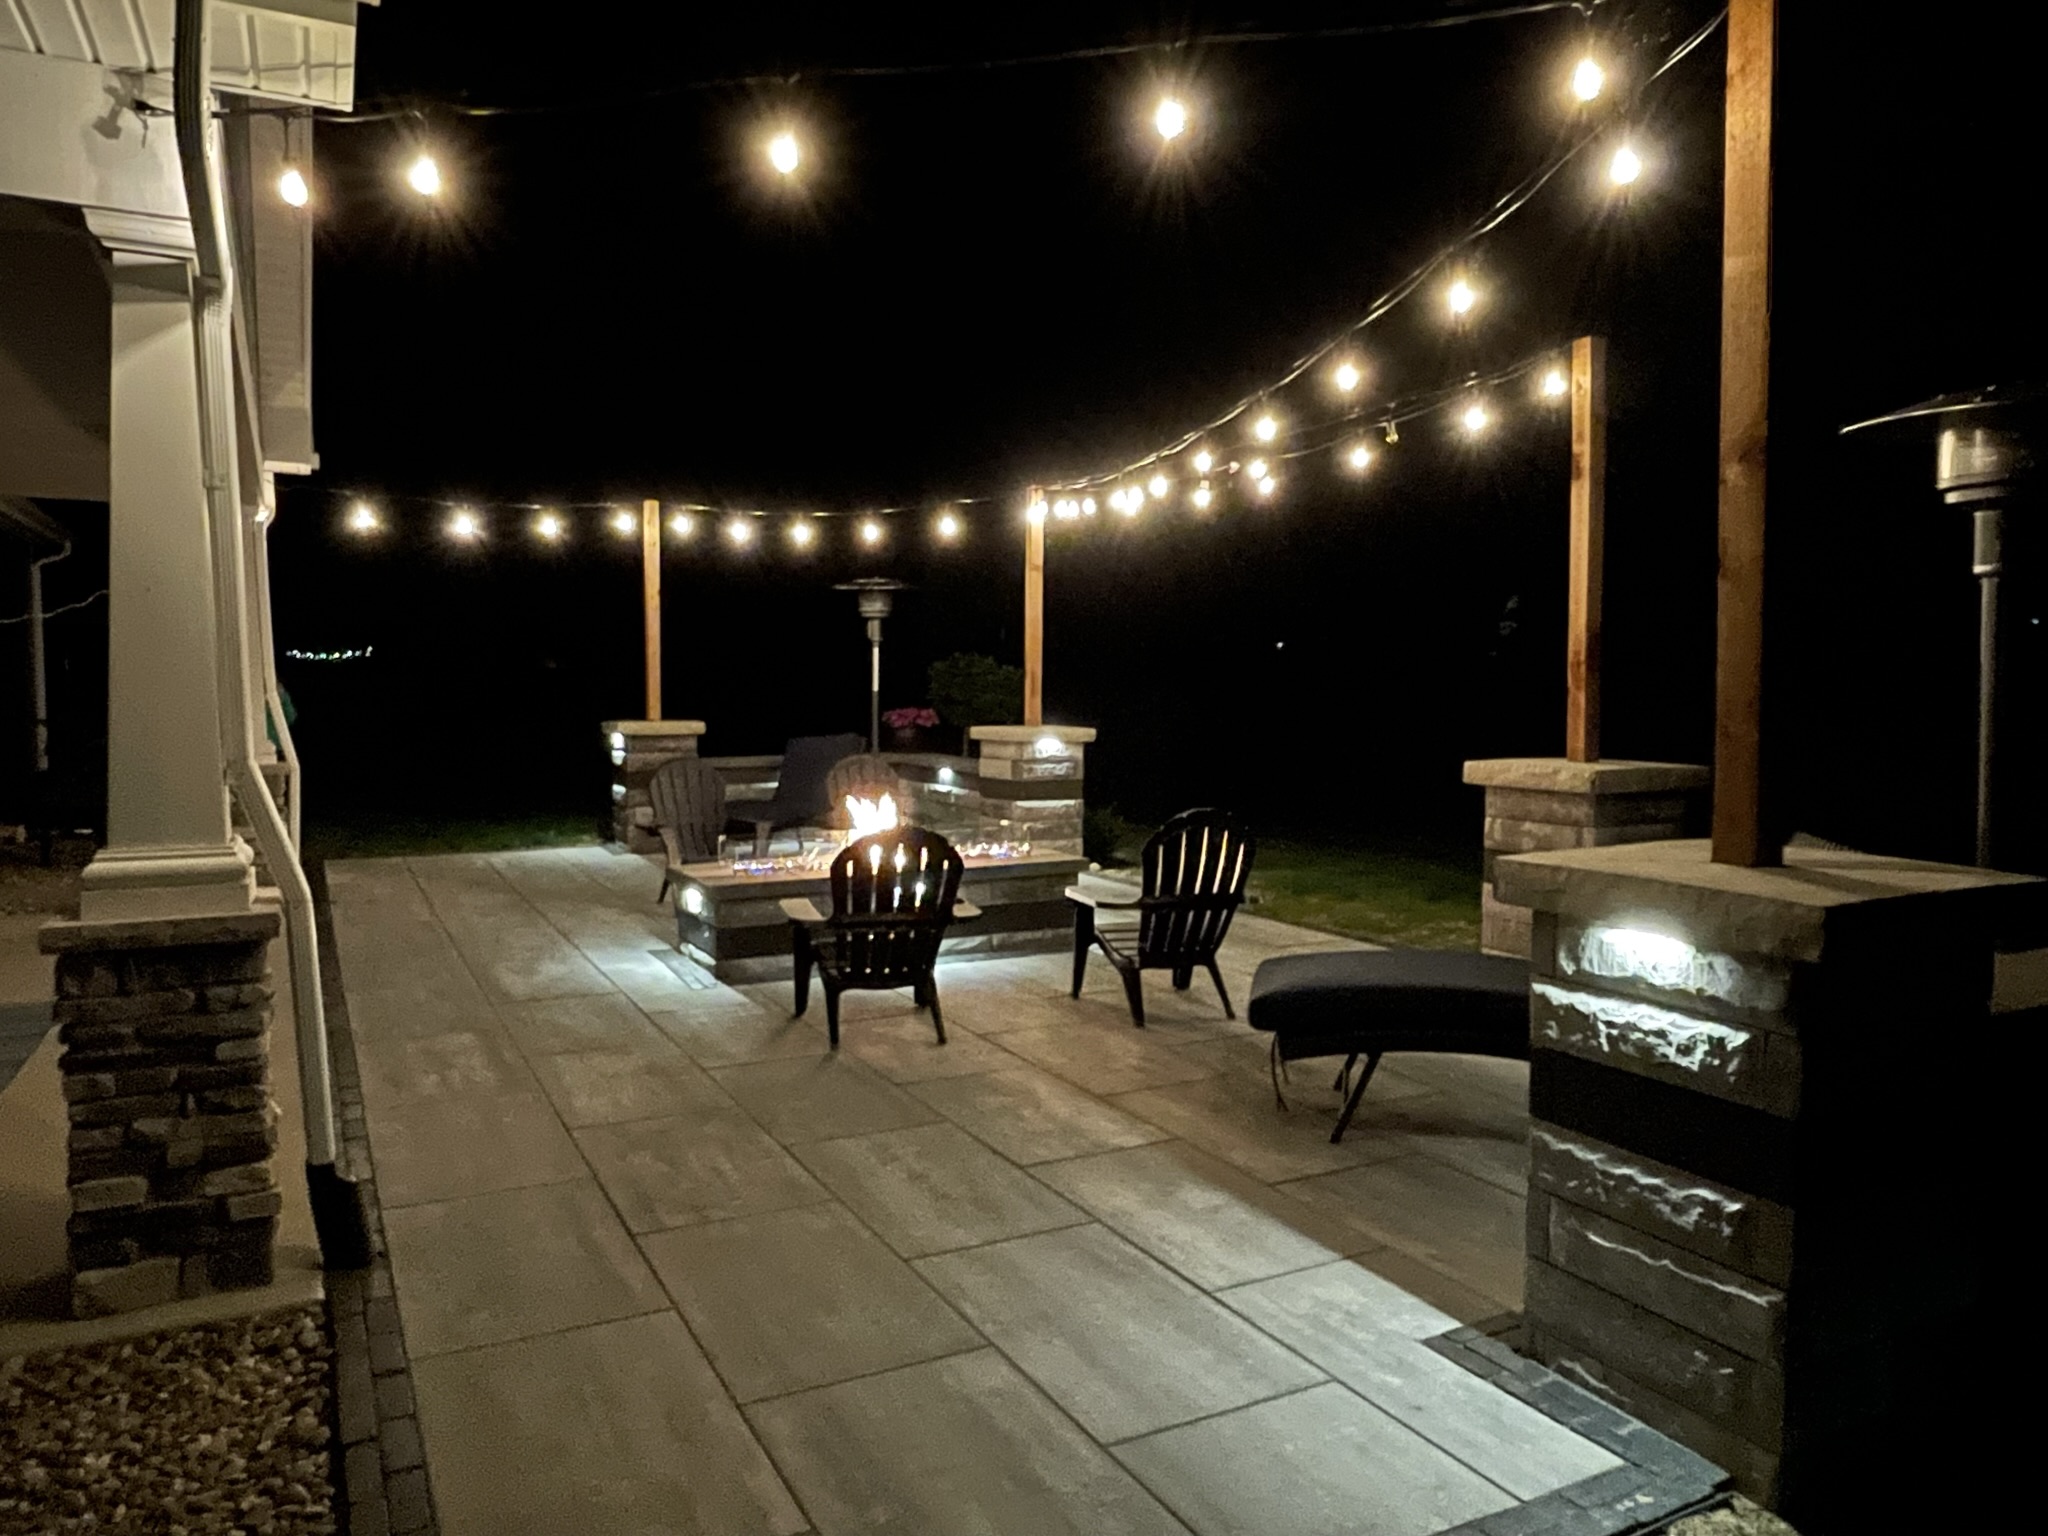 Back patio with firepit and string lights at night